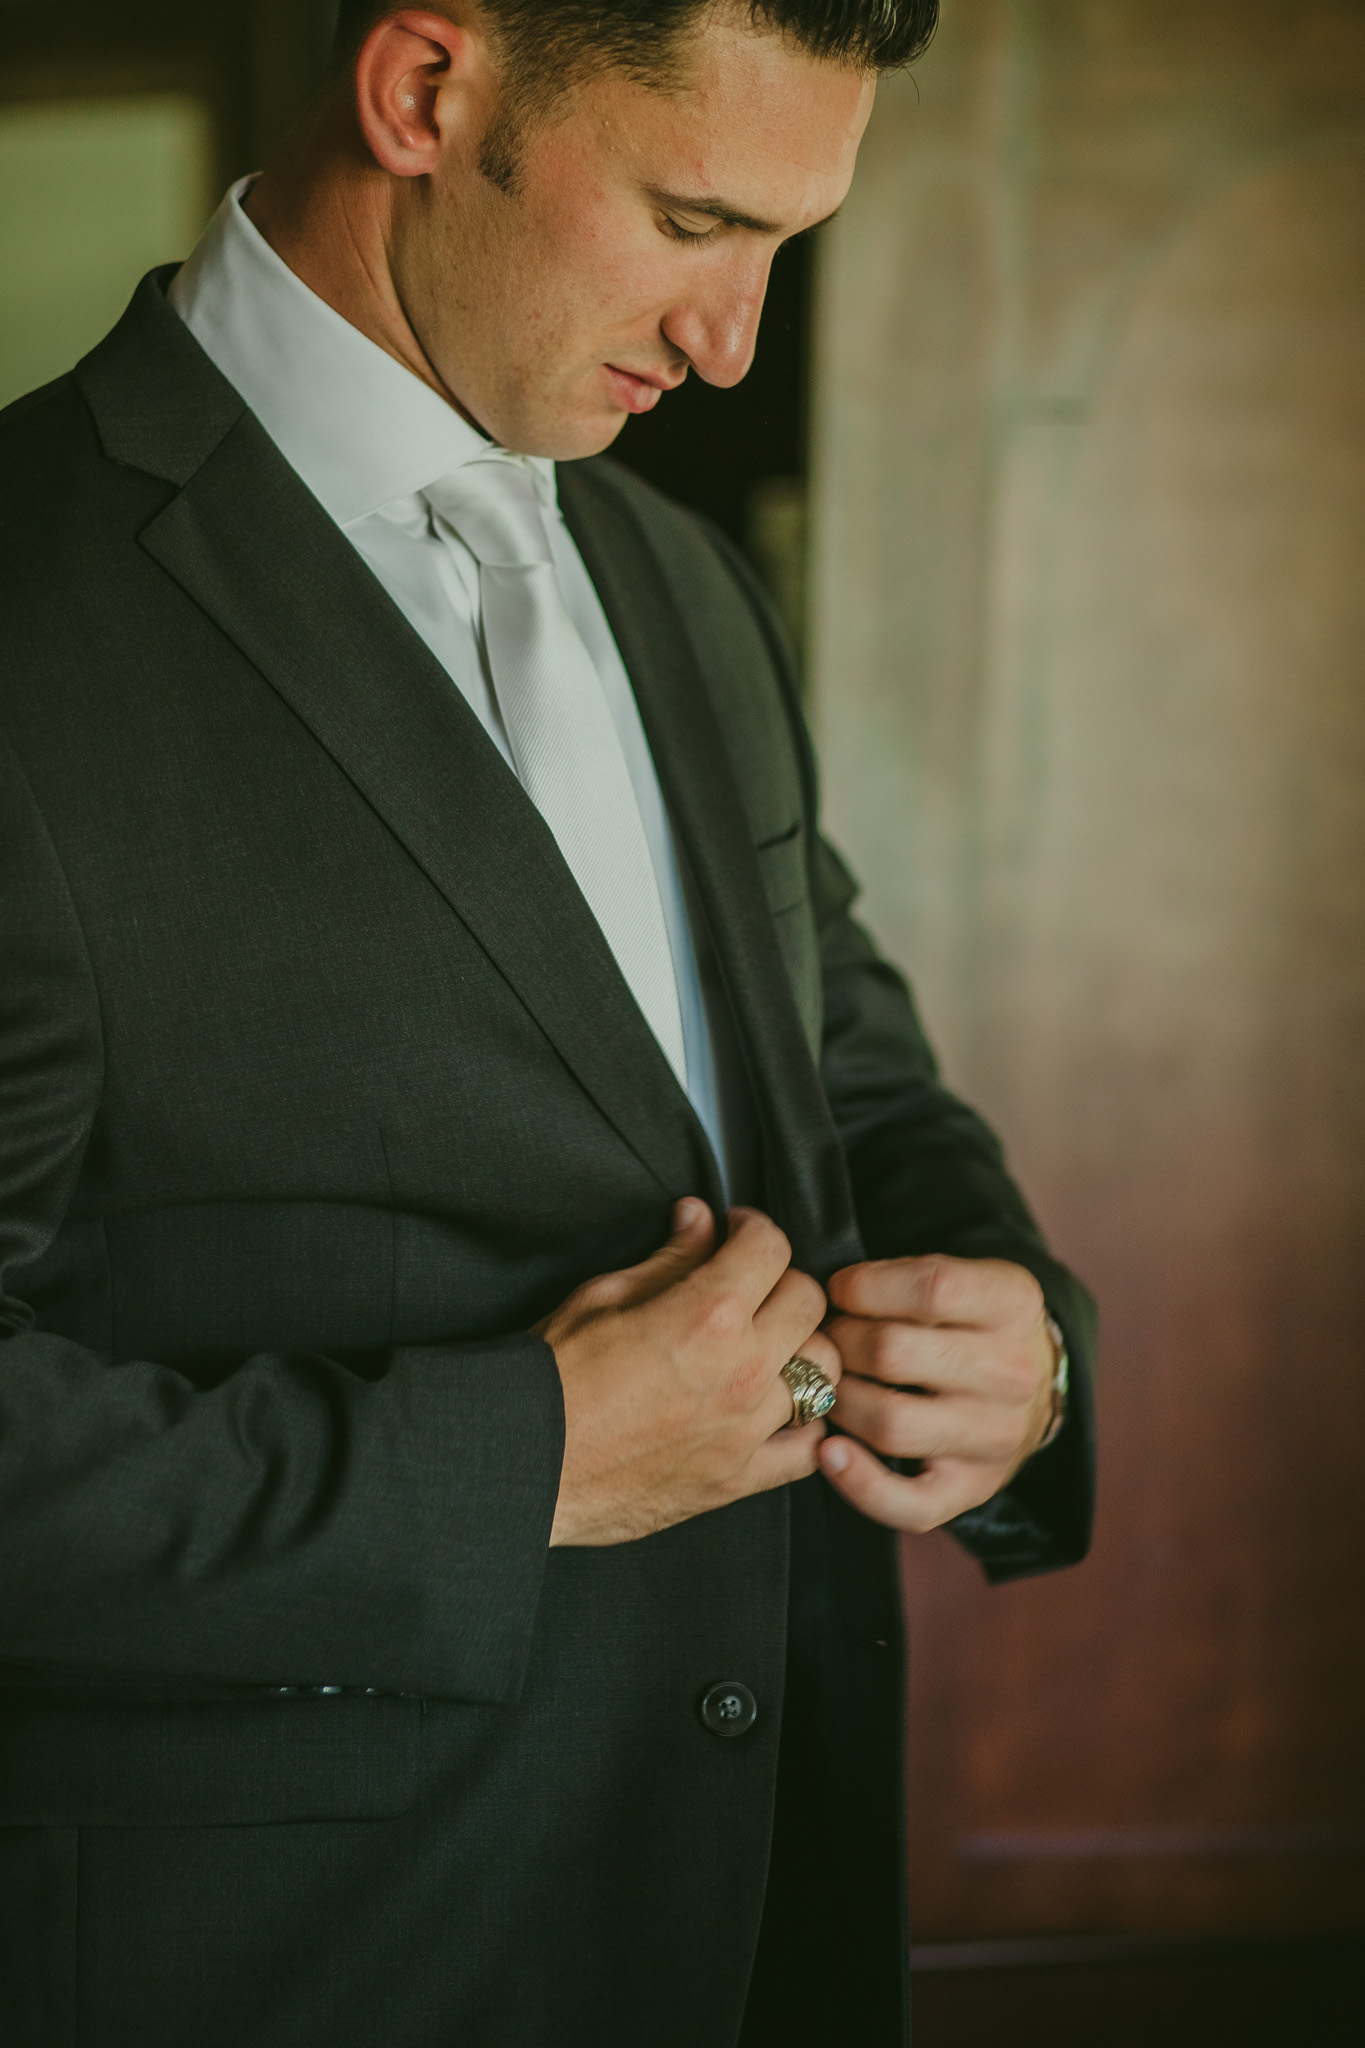 Groom gets ready for his wedding at Crest Pavilion in Asheville, NC